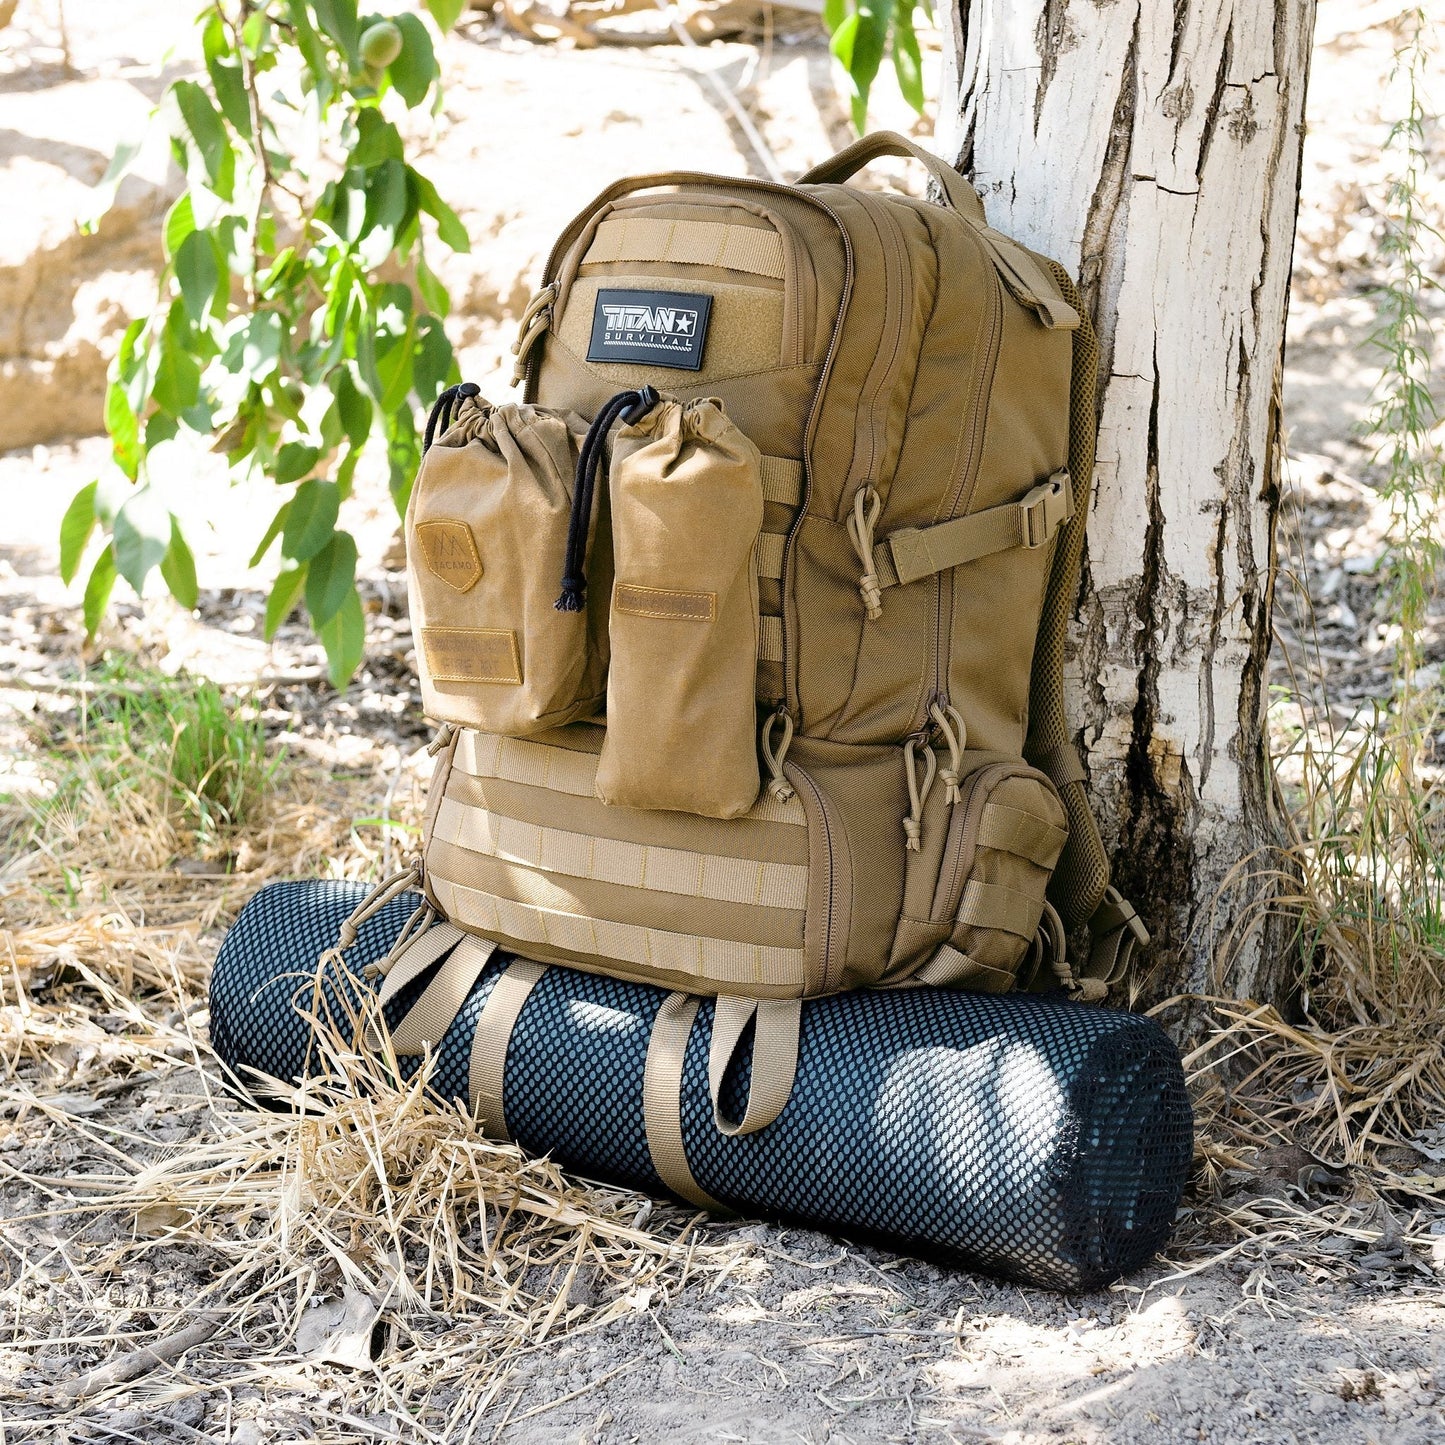 BC50 50L Tactical Backpack with a yoga mat strapped on in a natural outdoor setting